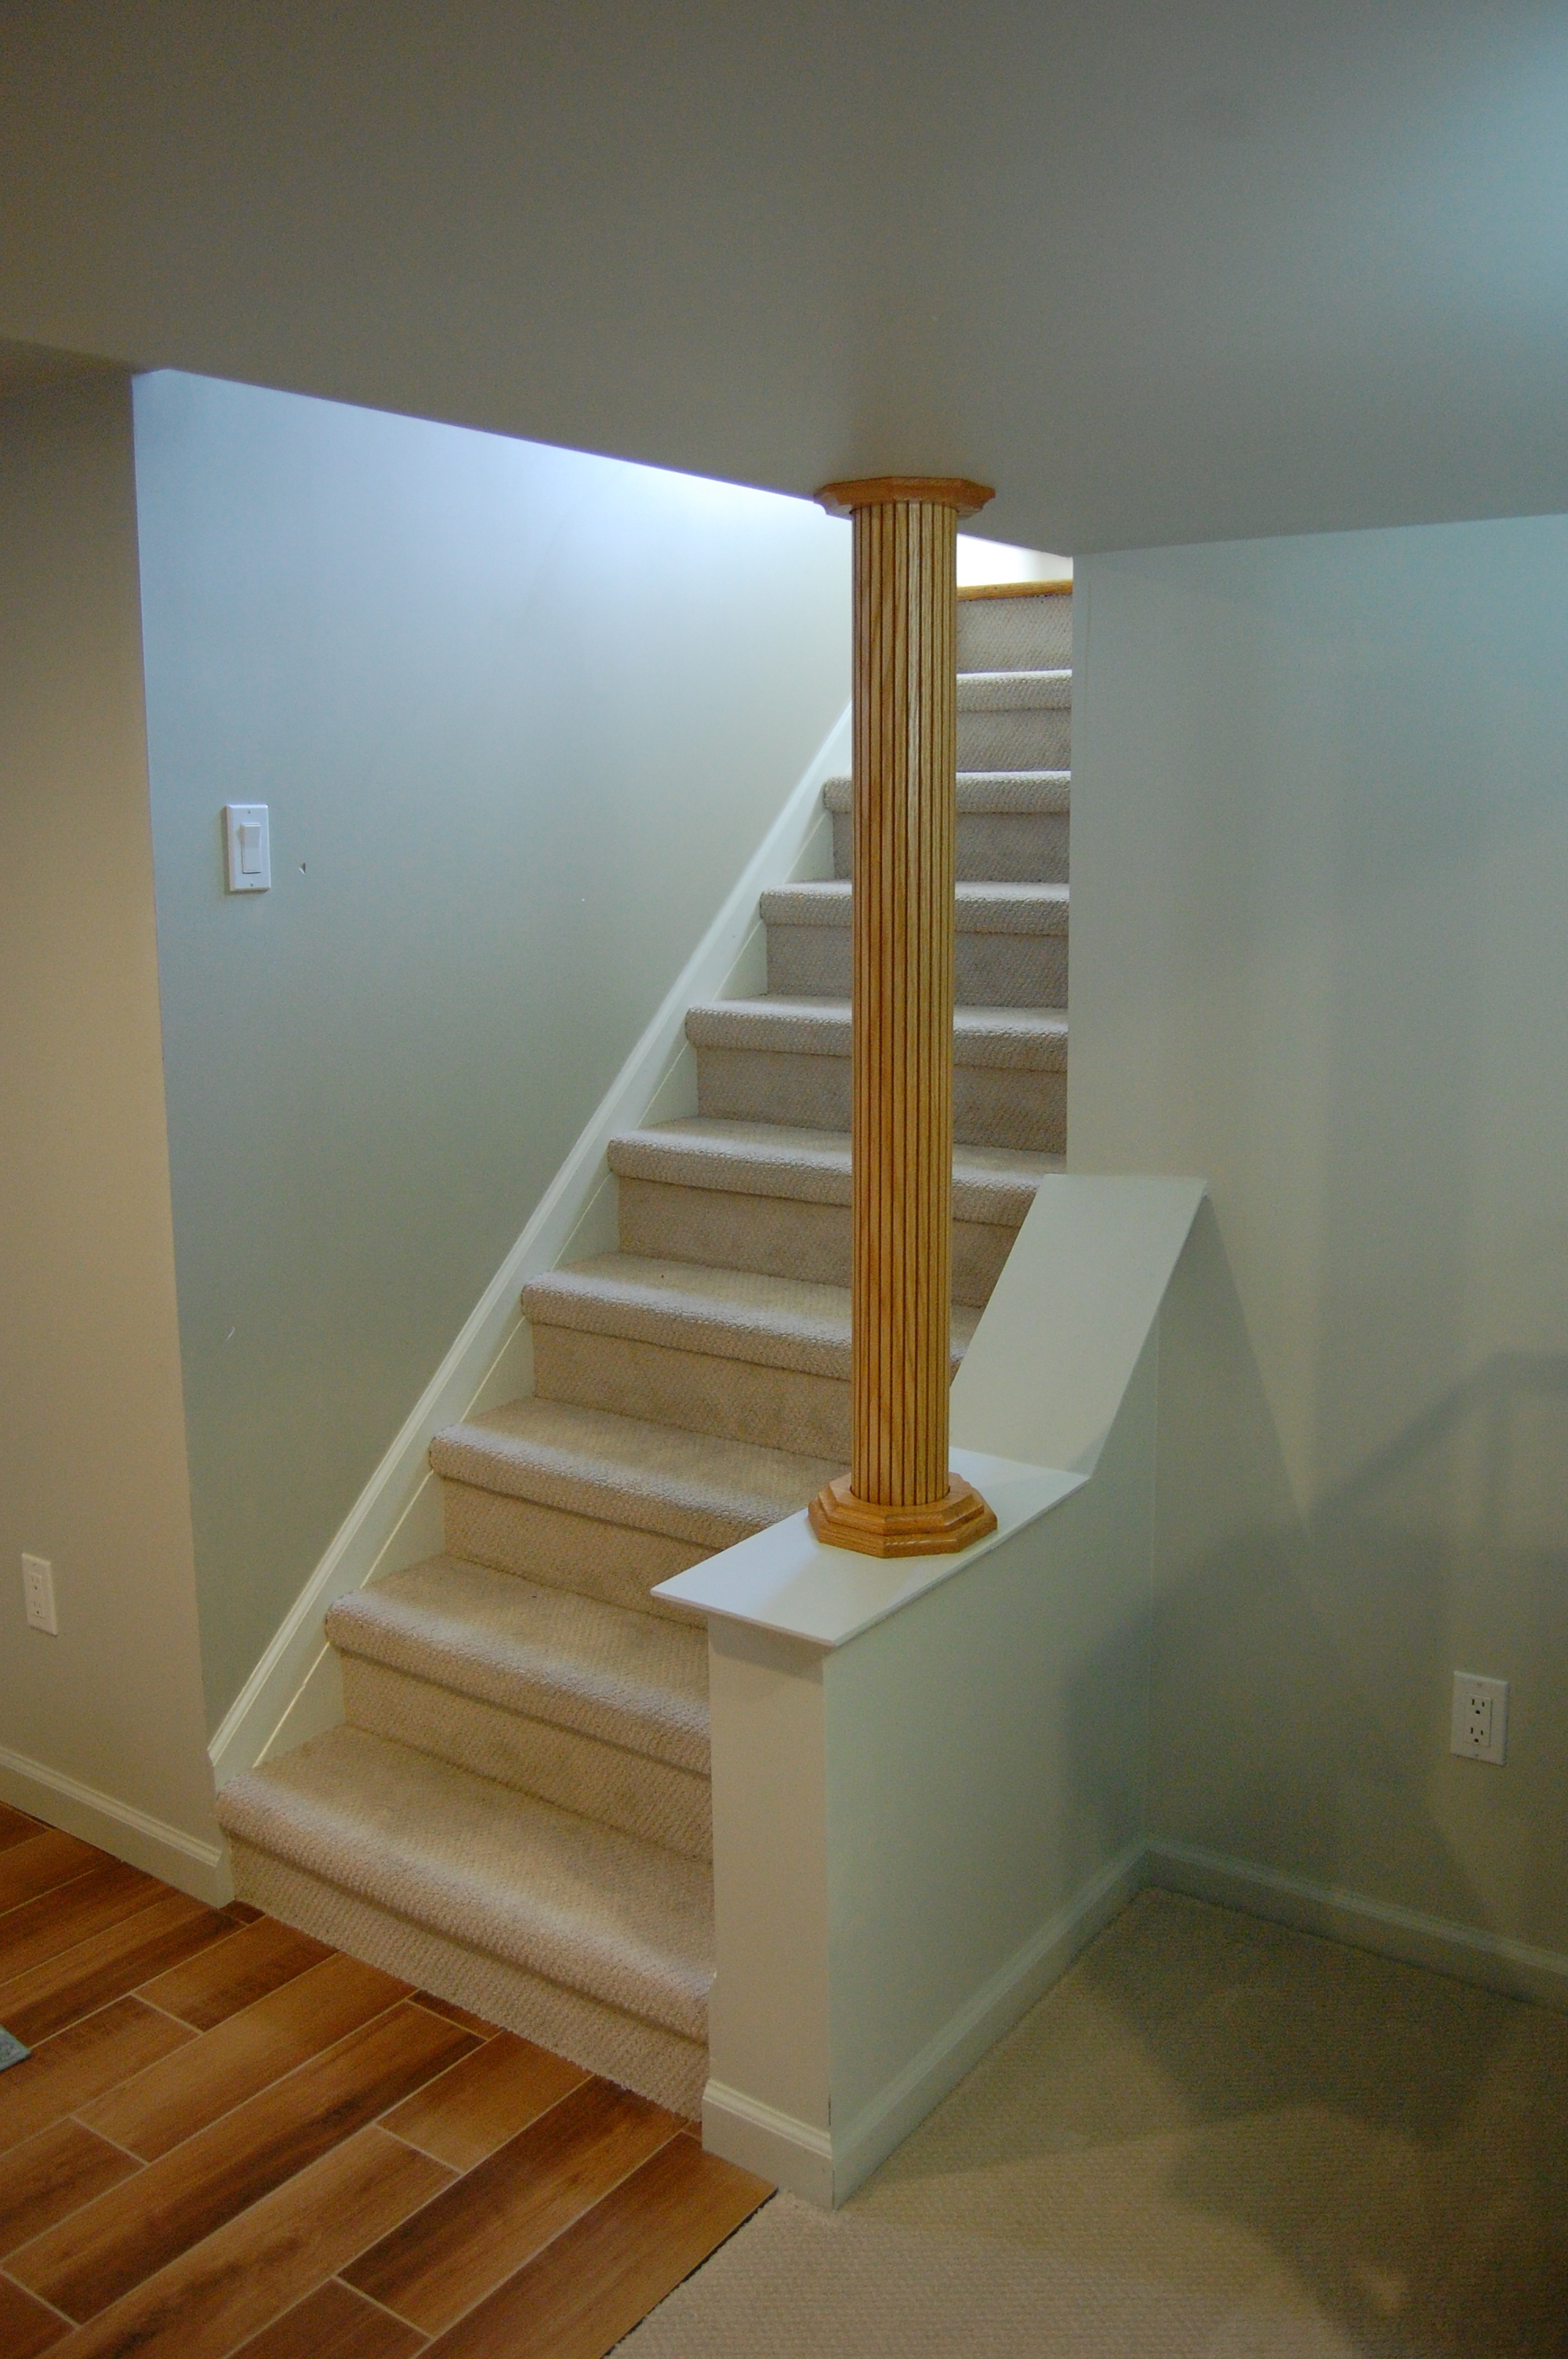 Basement Layout Tip - Open Your Stairwell